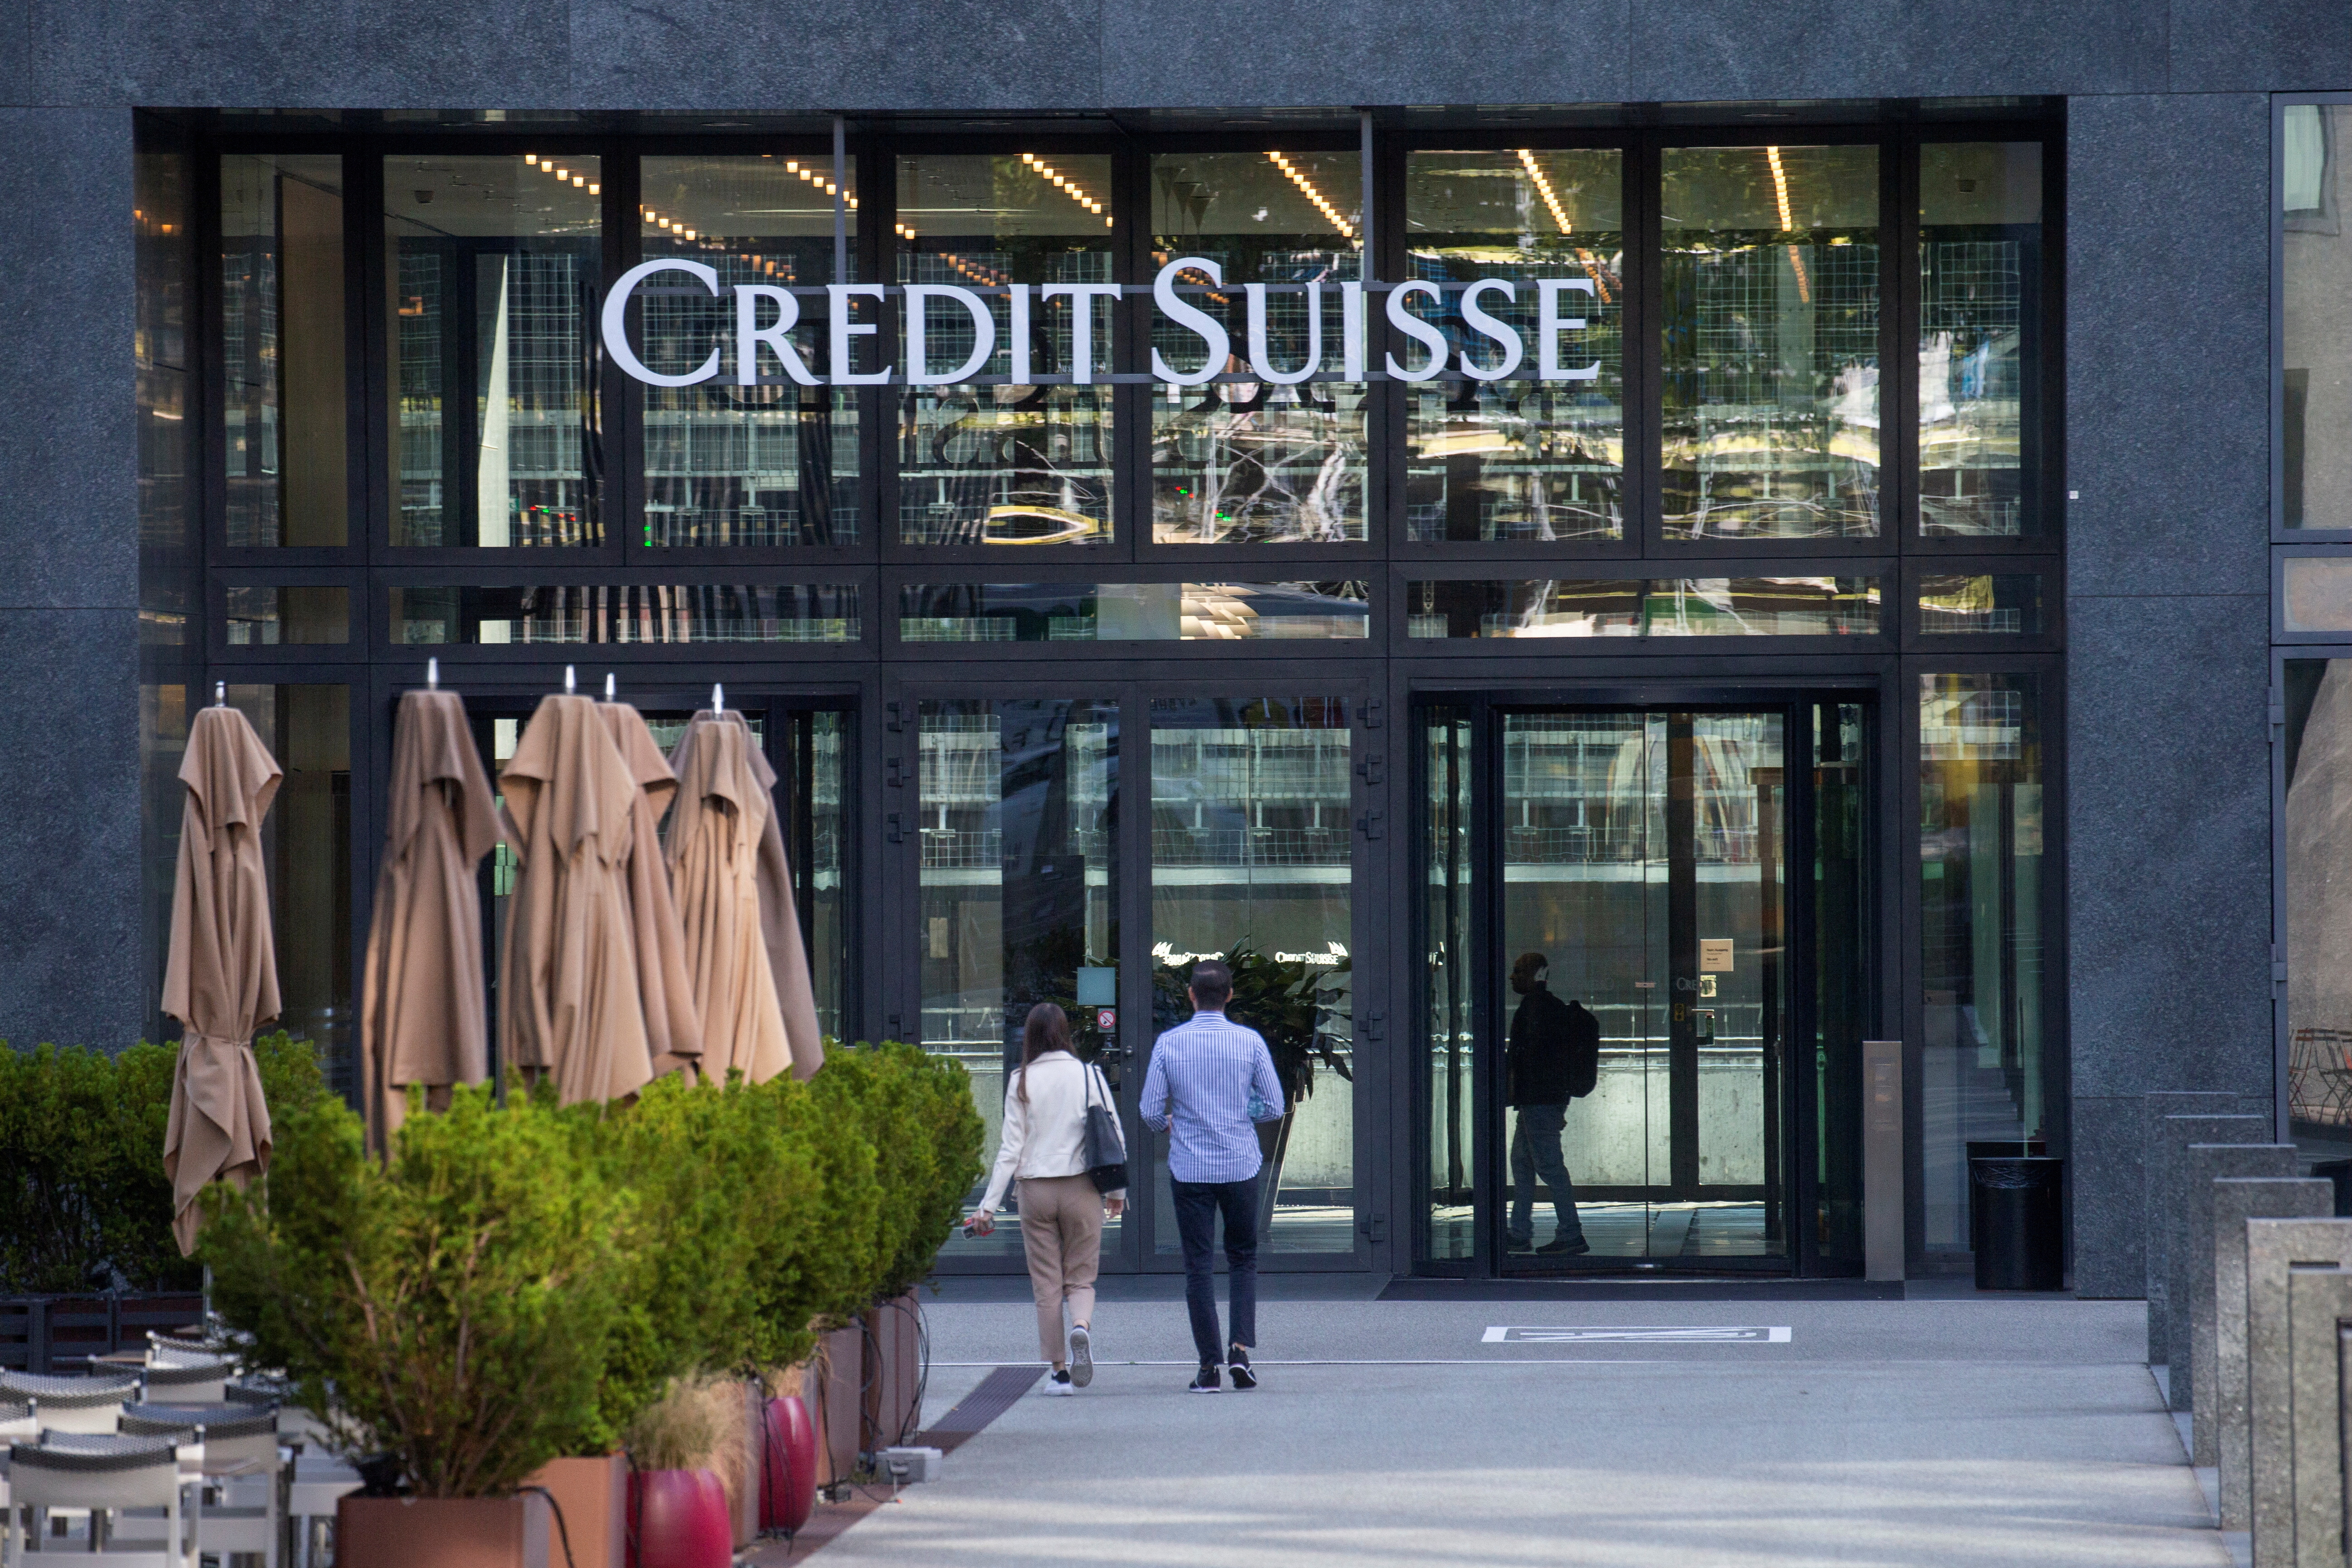 The Swiss bank Credit Suisse logo appears in Zurich